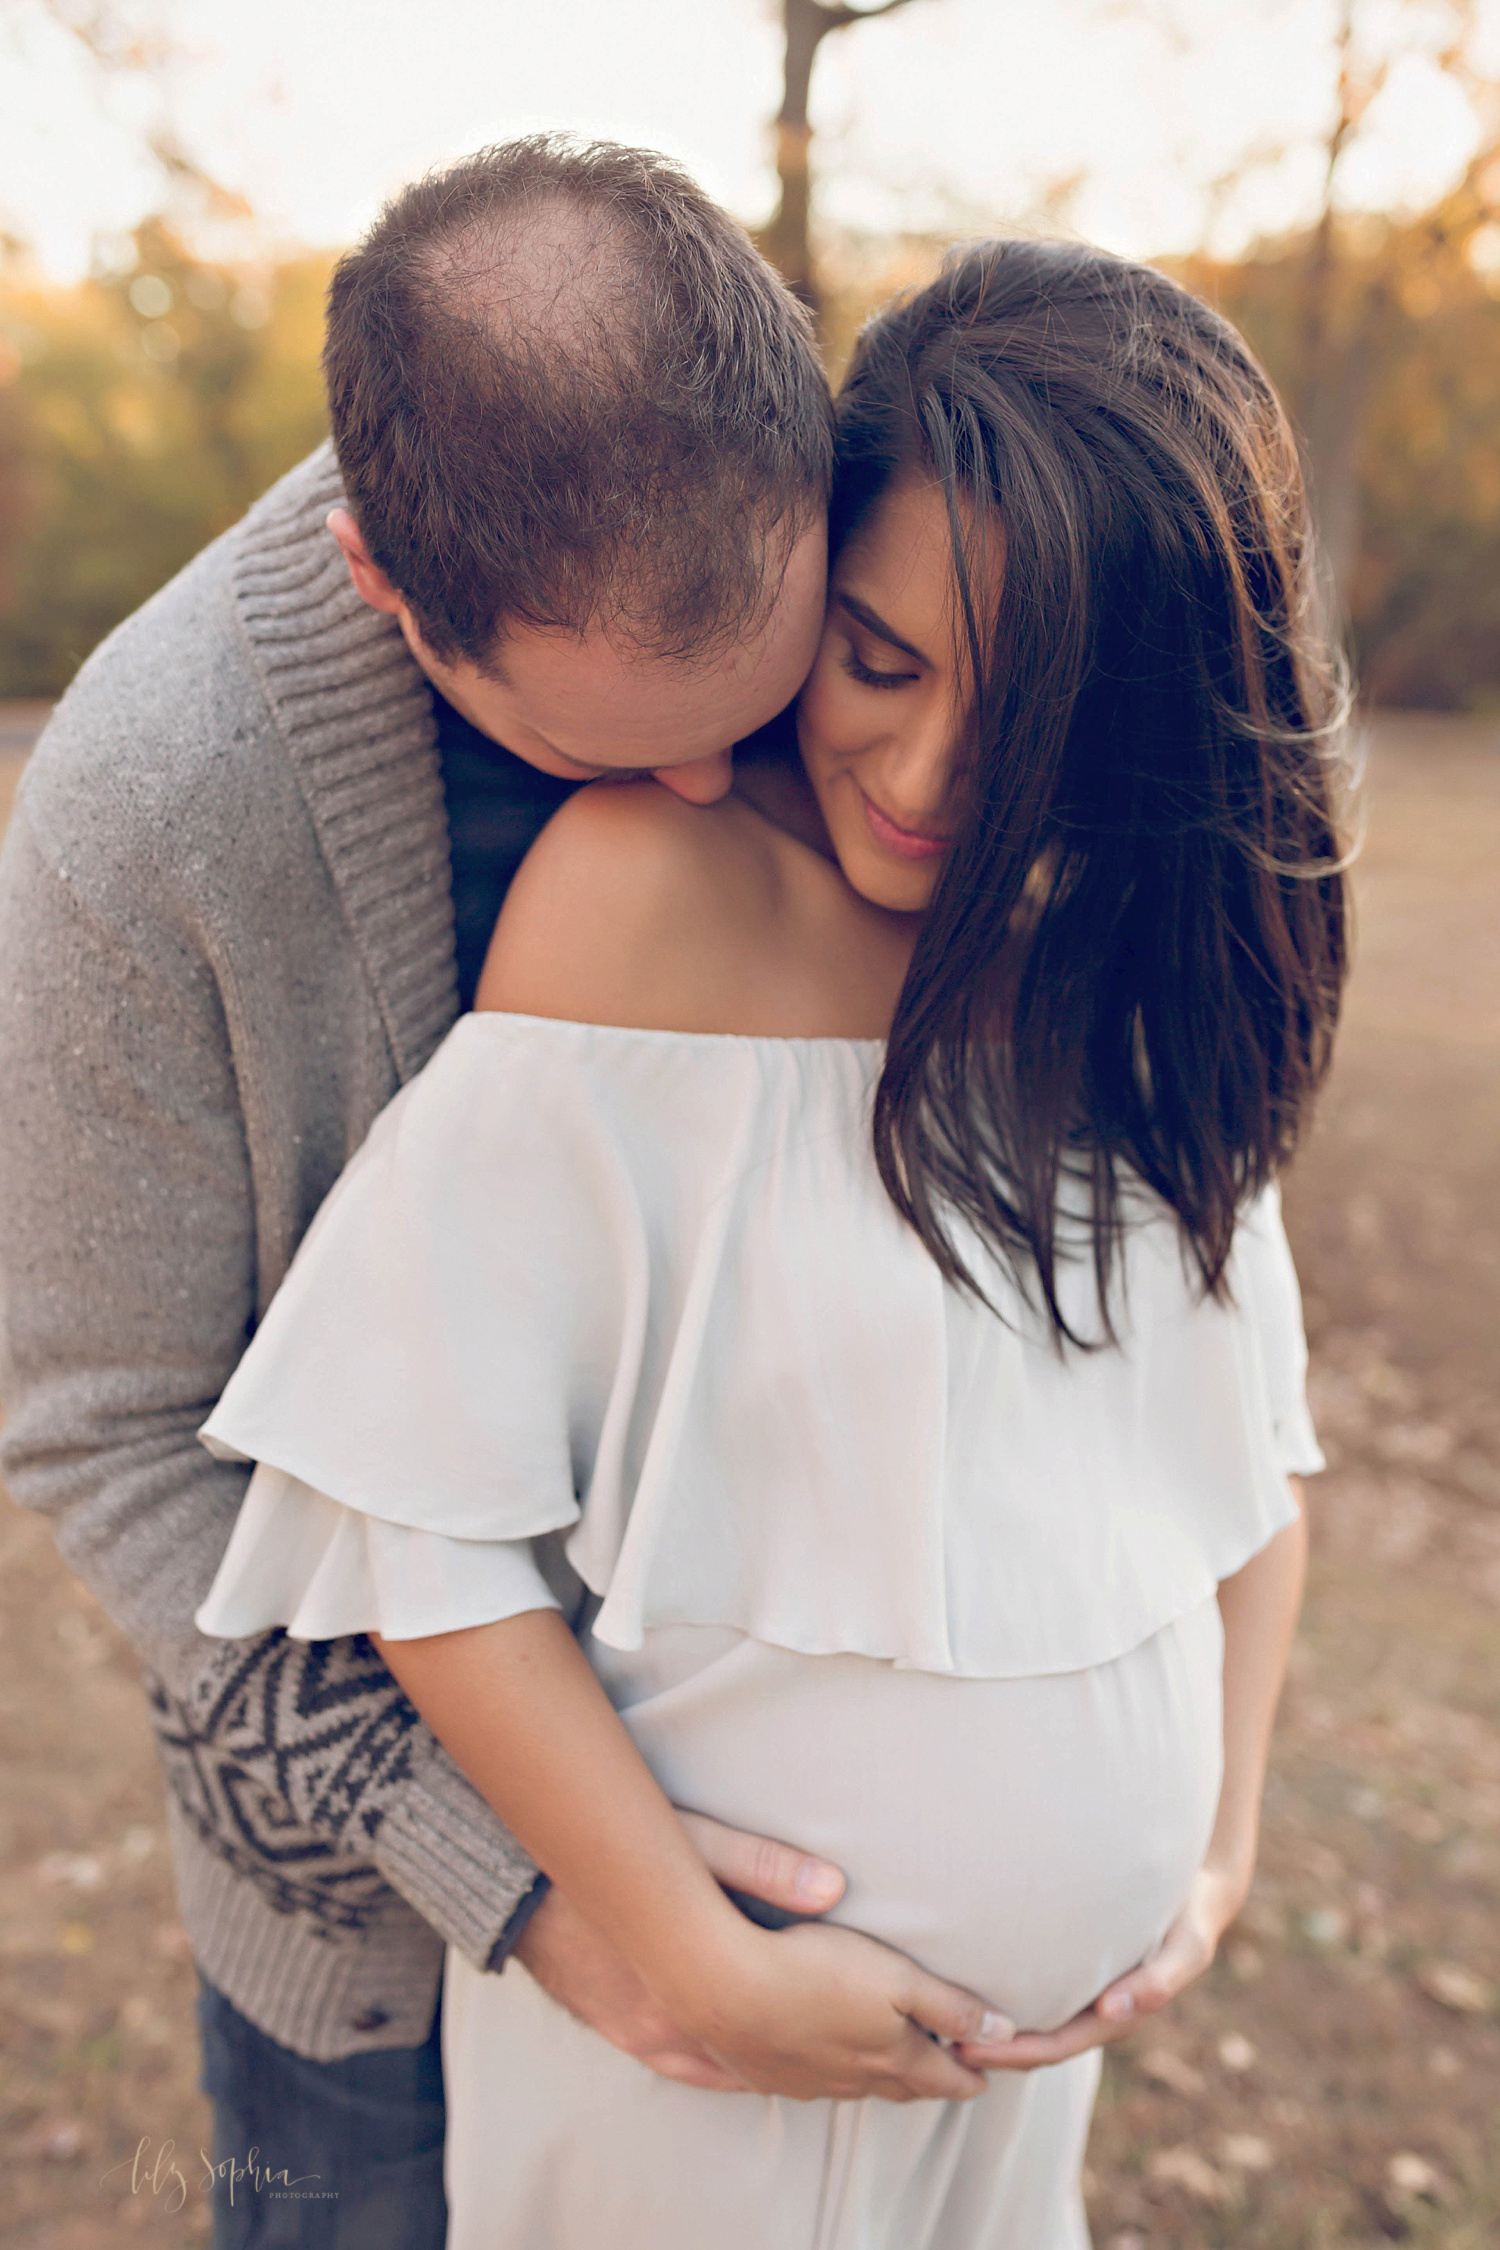  Intimate image of an expecting couple. The pregnant woman is wearing an off the shoulder dress and cradling her belly while her husband wraps his arm around her and kisses her shoulder.&nbsp; 